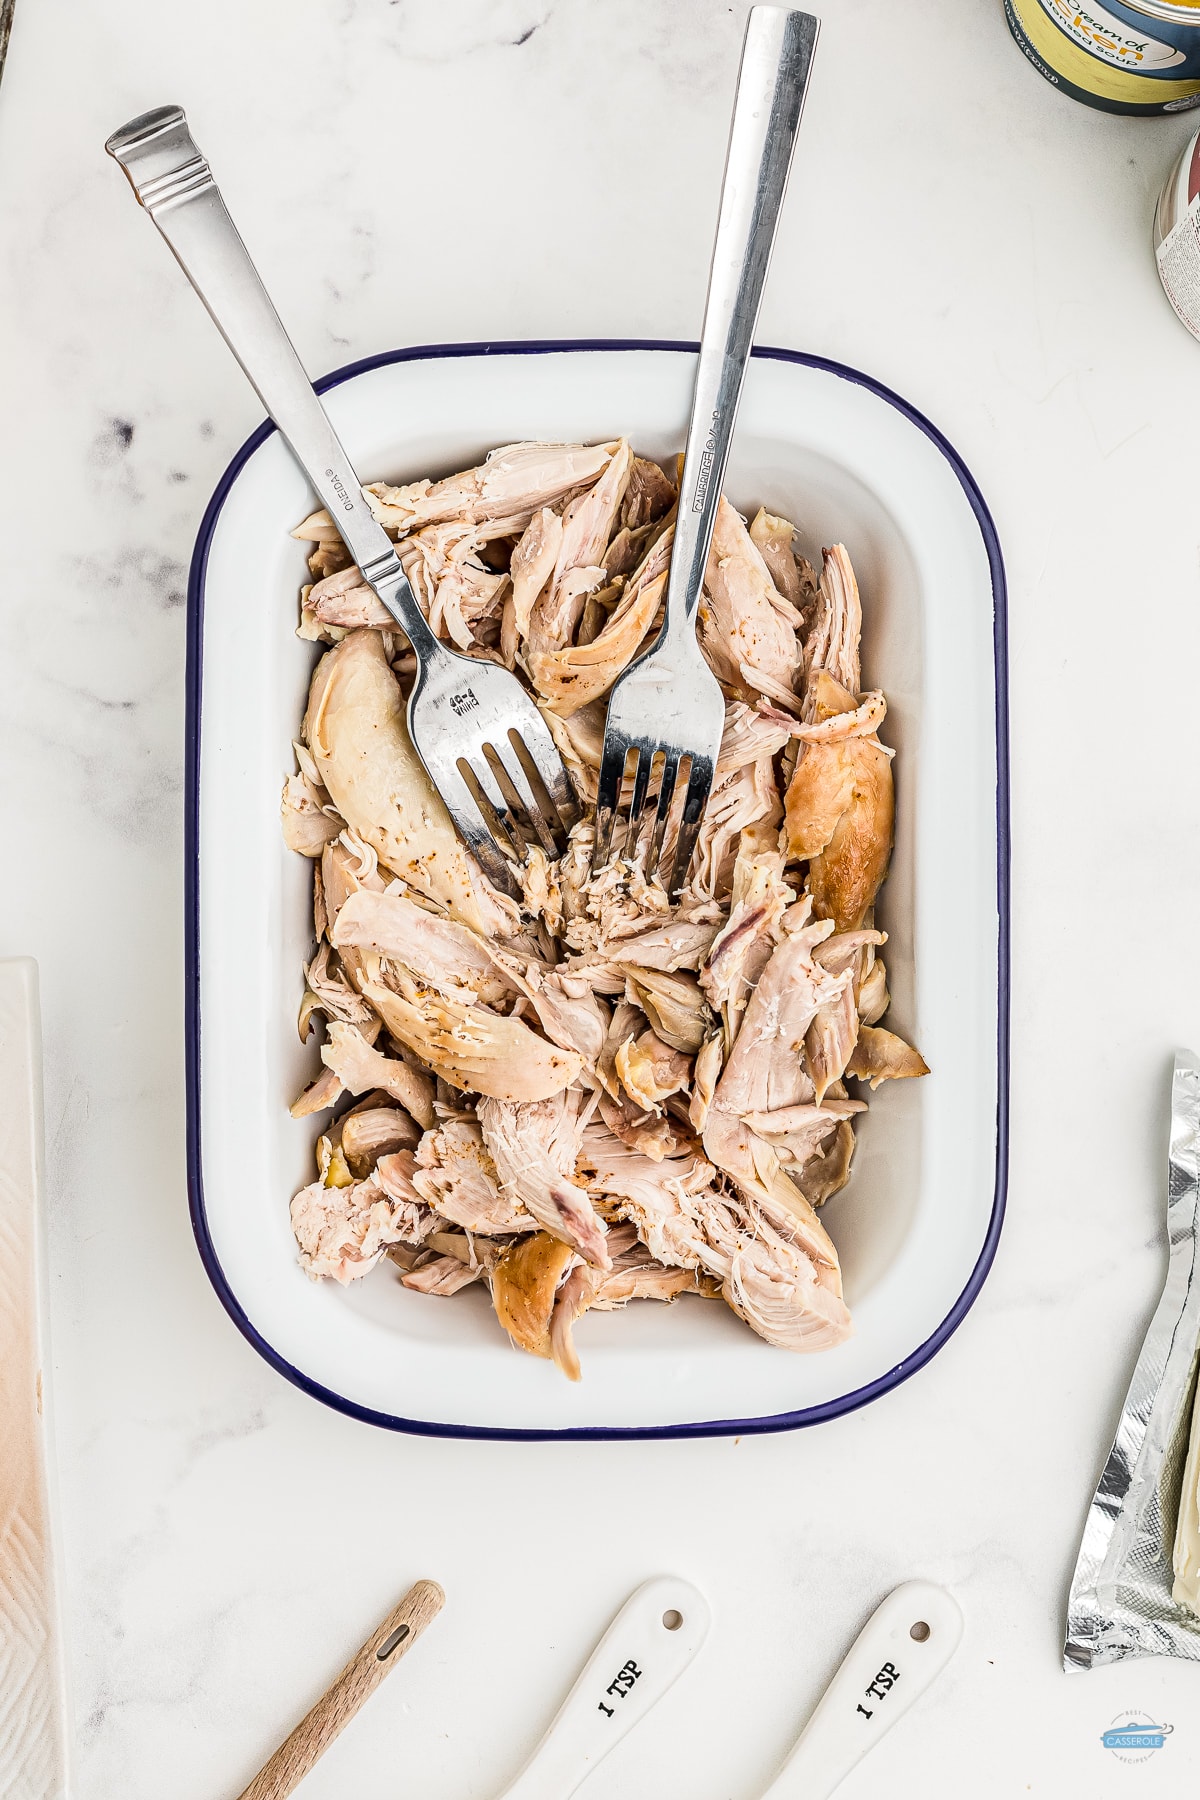 shredded chicken in a blue and whit4e dish with two forks